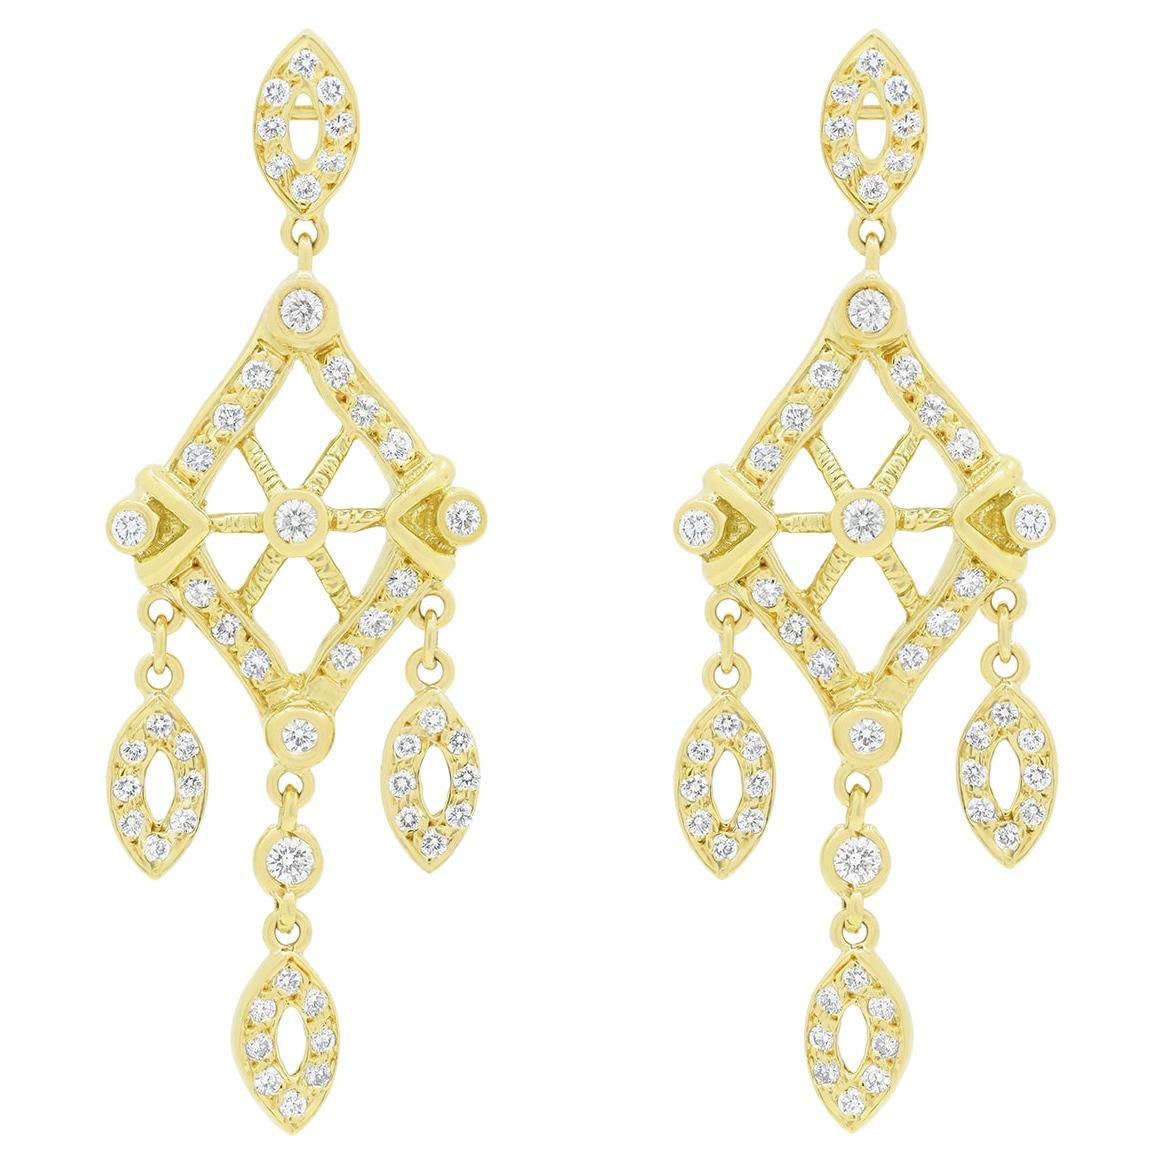 Diana M. 18kt yellow gold earrings diamond shape with 2.00cts total 